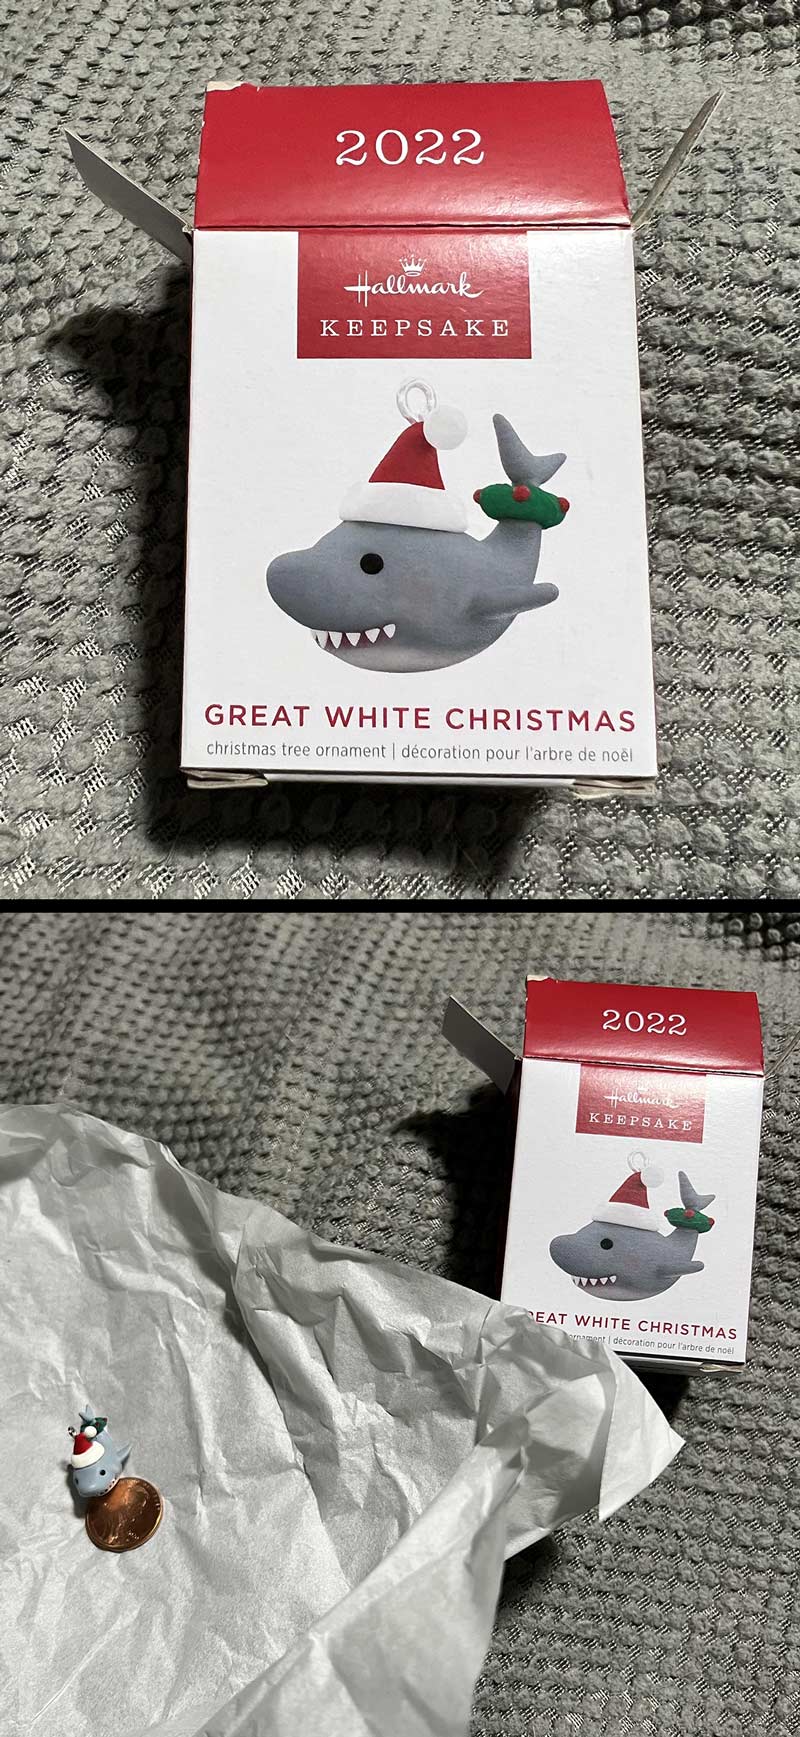 My wife bought this $9 Christmas ornament